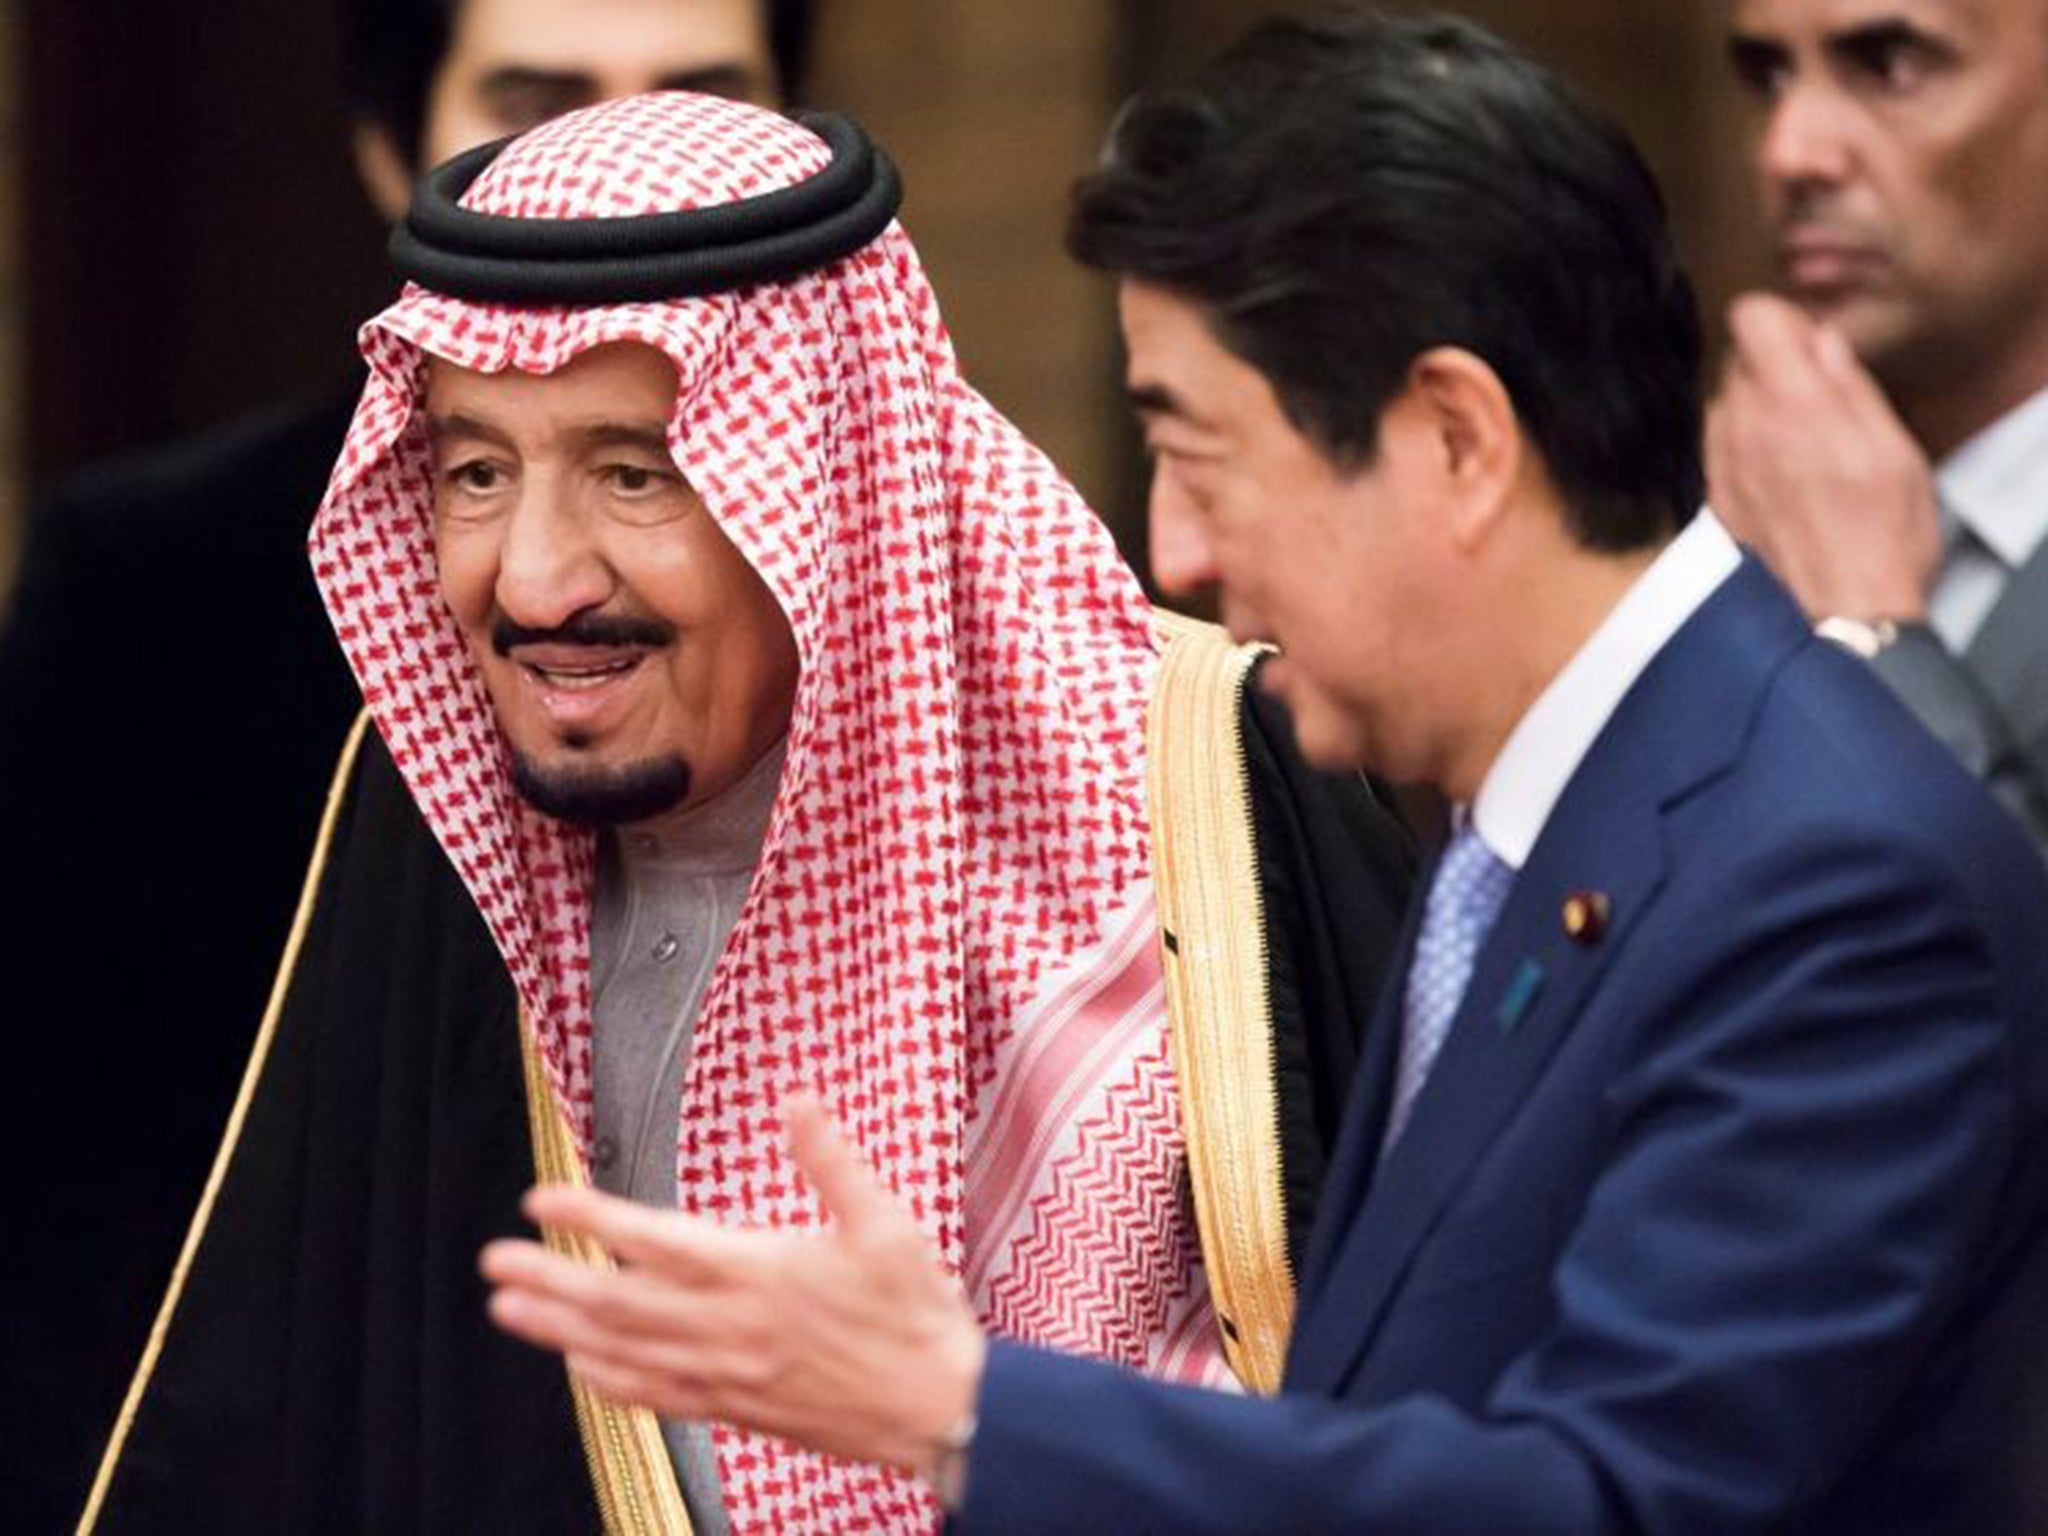 Saudi King brings two golden escalators and 100 limousines for four day trip to Japan The Independent The Independent